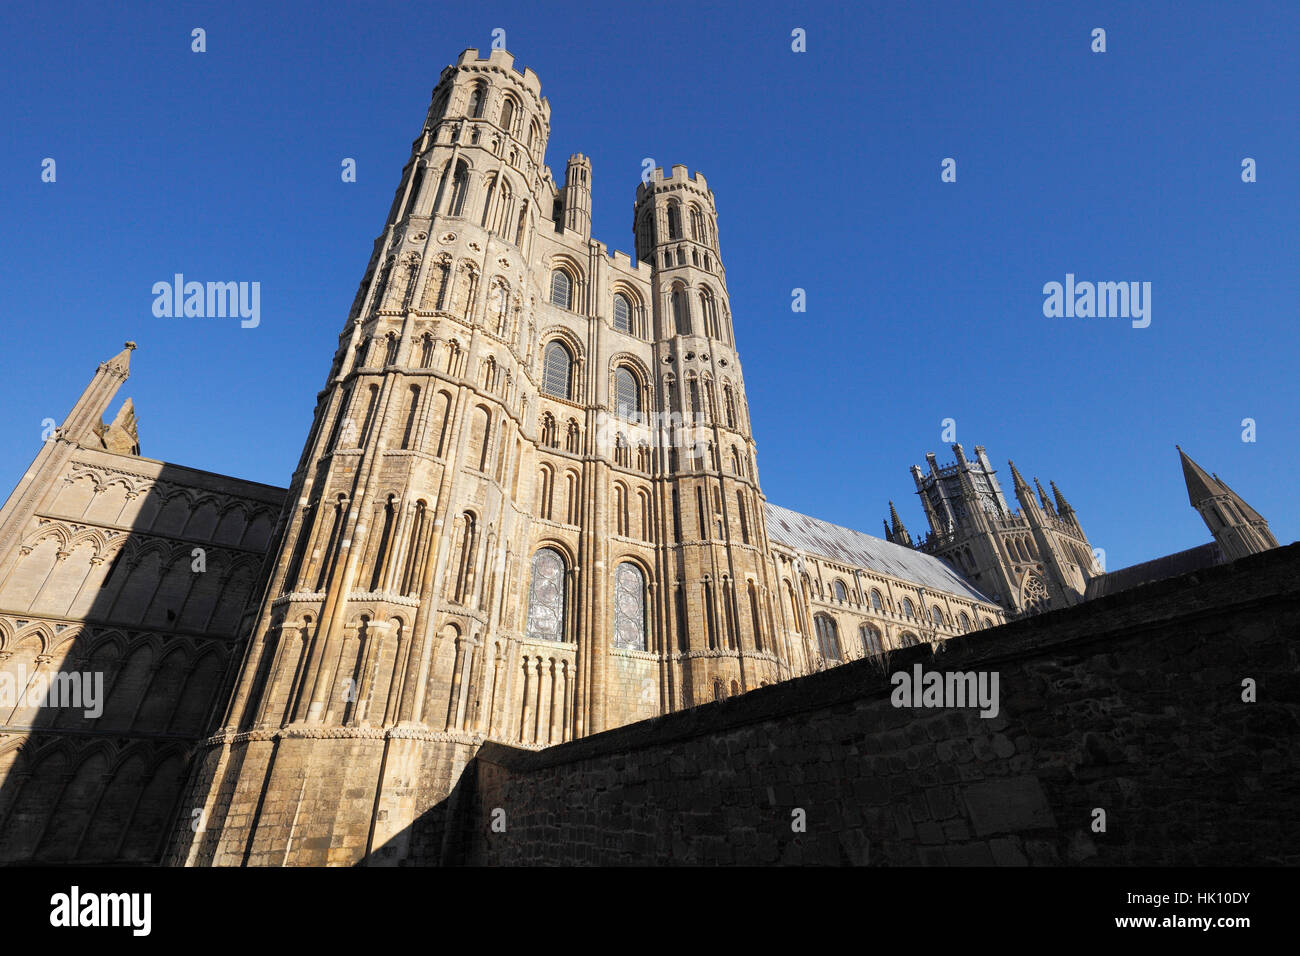 Ely Cathedral, the South West transept and the Octagon visible in the background. Stock Photo